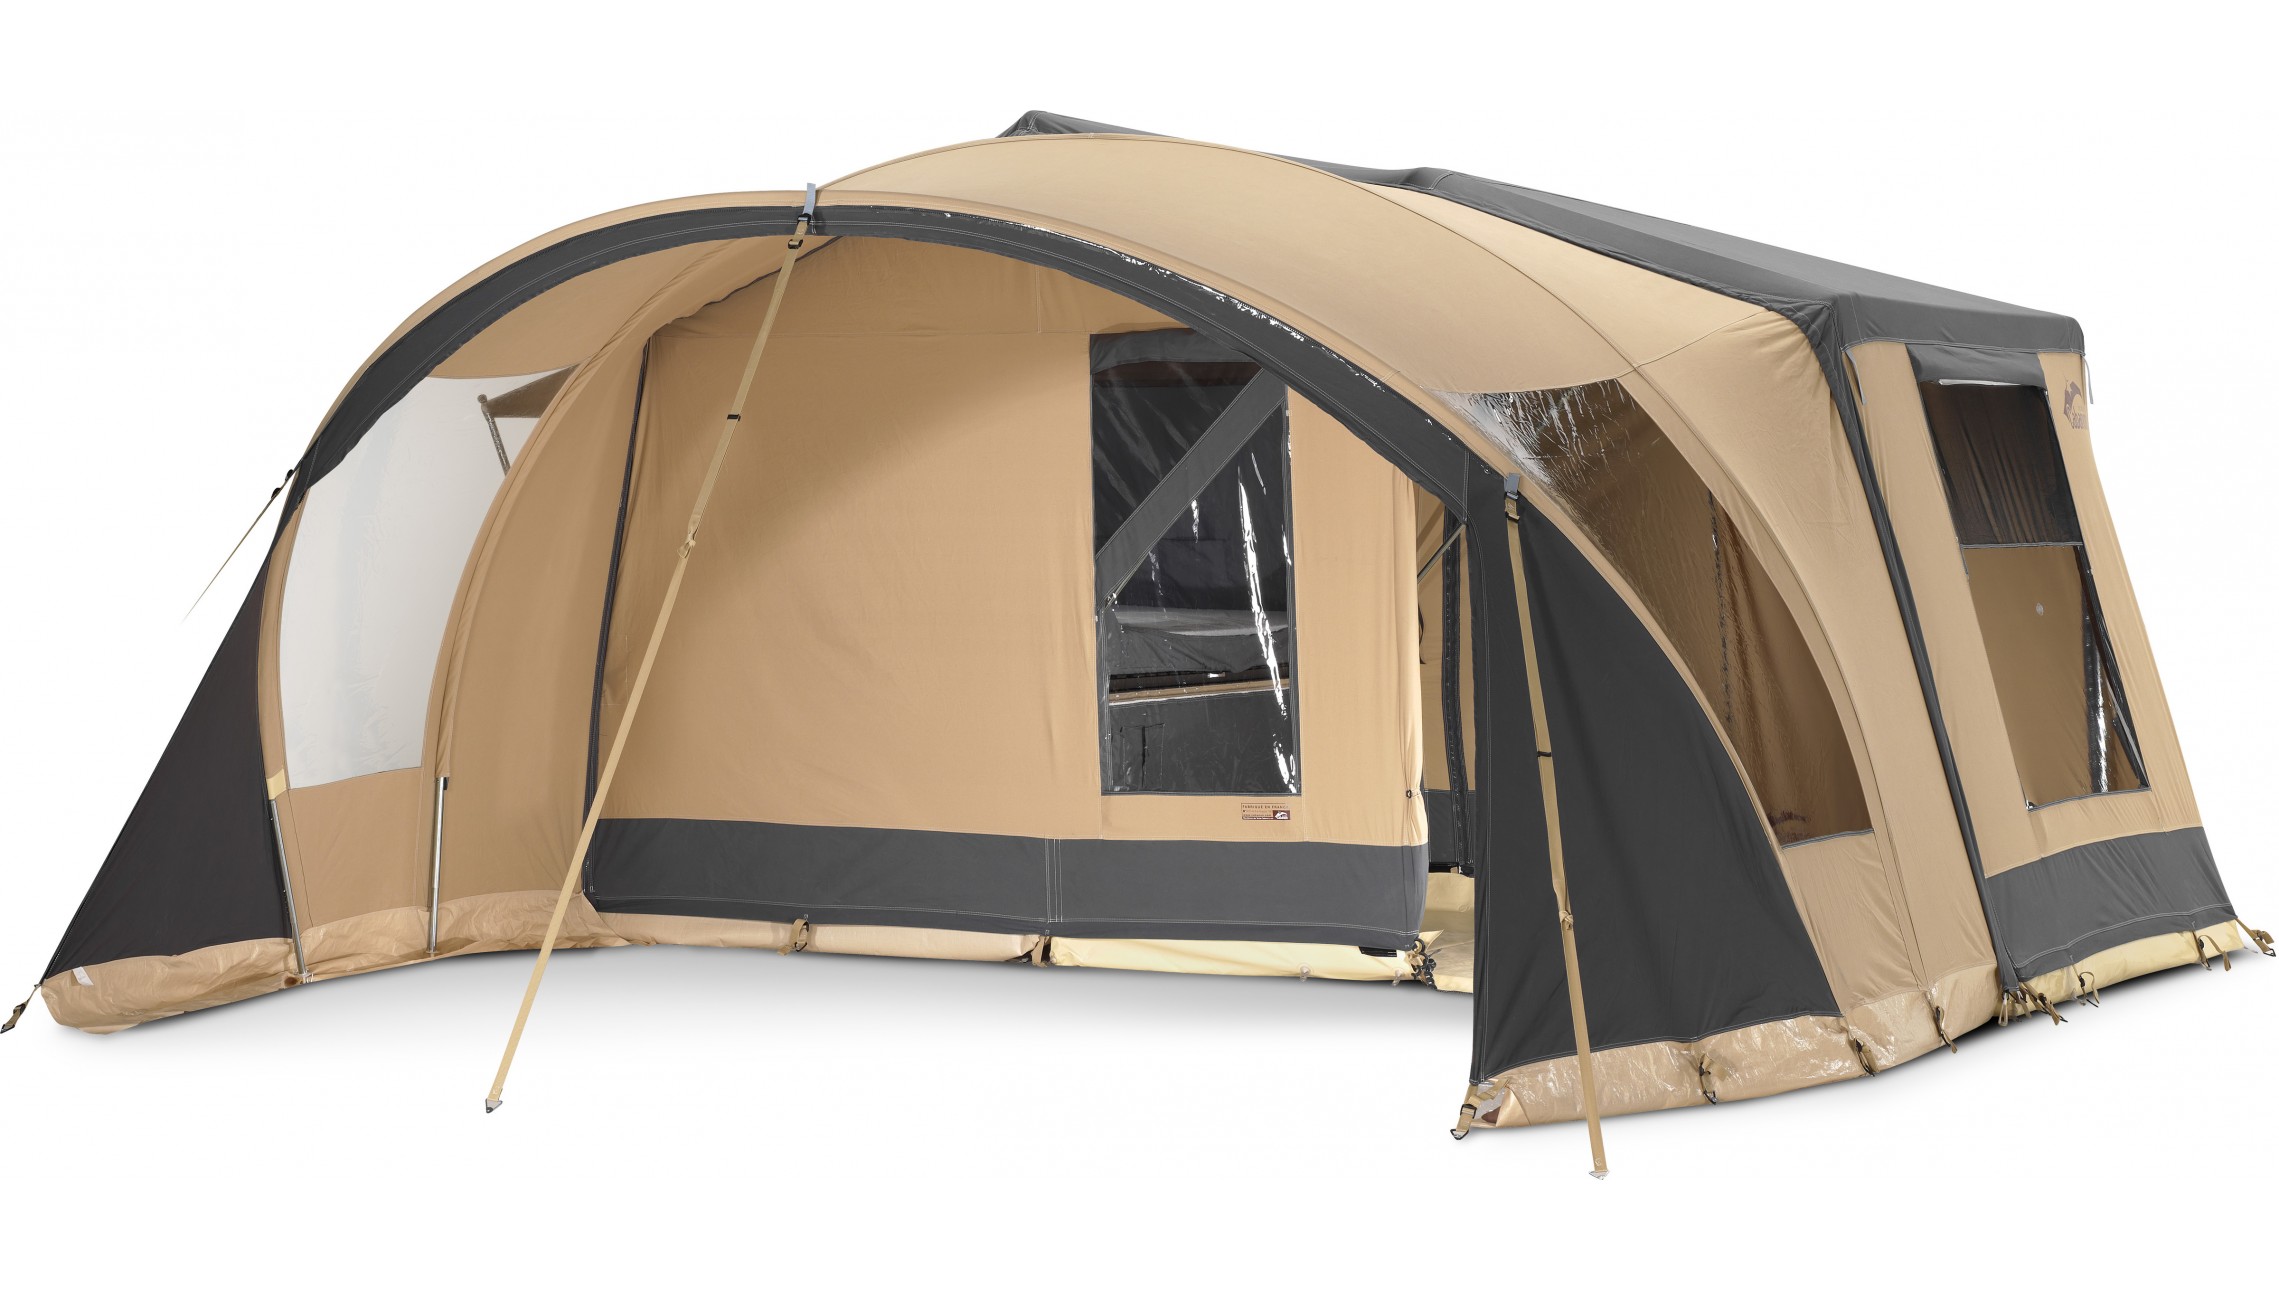 Malawi 2.0 trailer tent with brakes and jacks - Cabanon, the tent ...